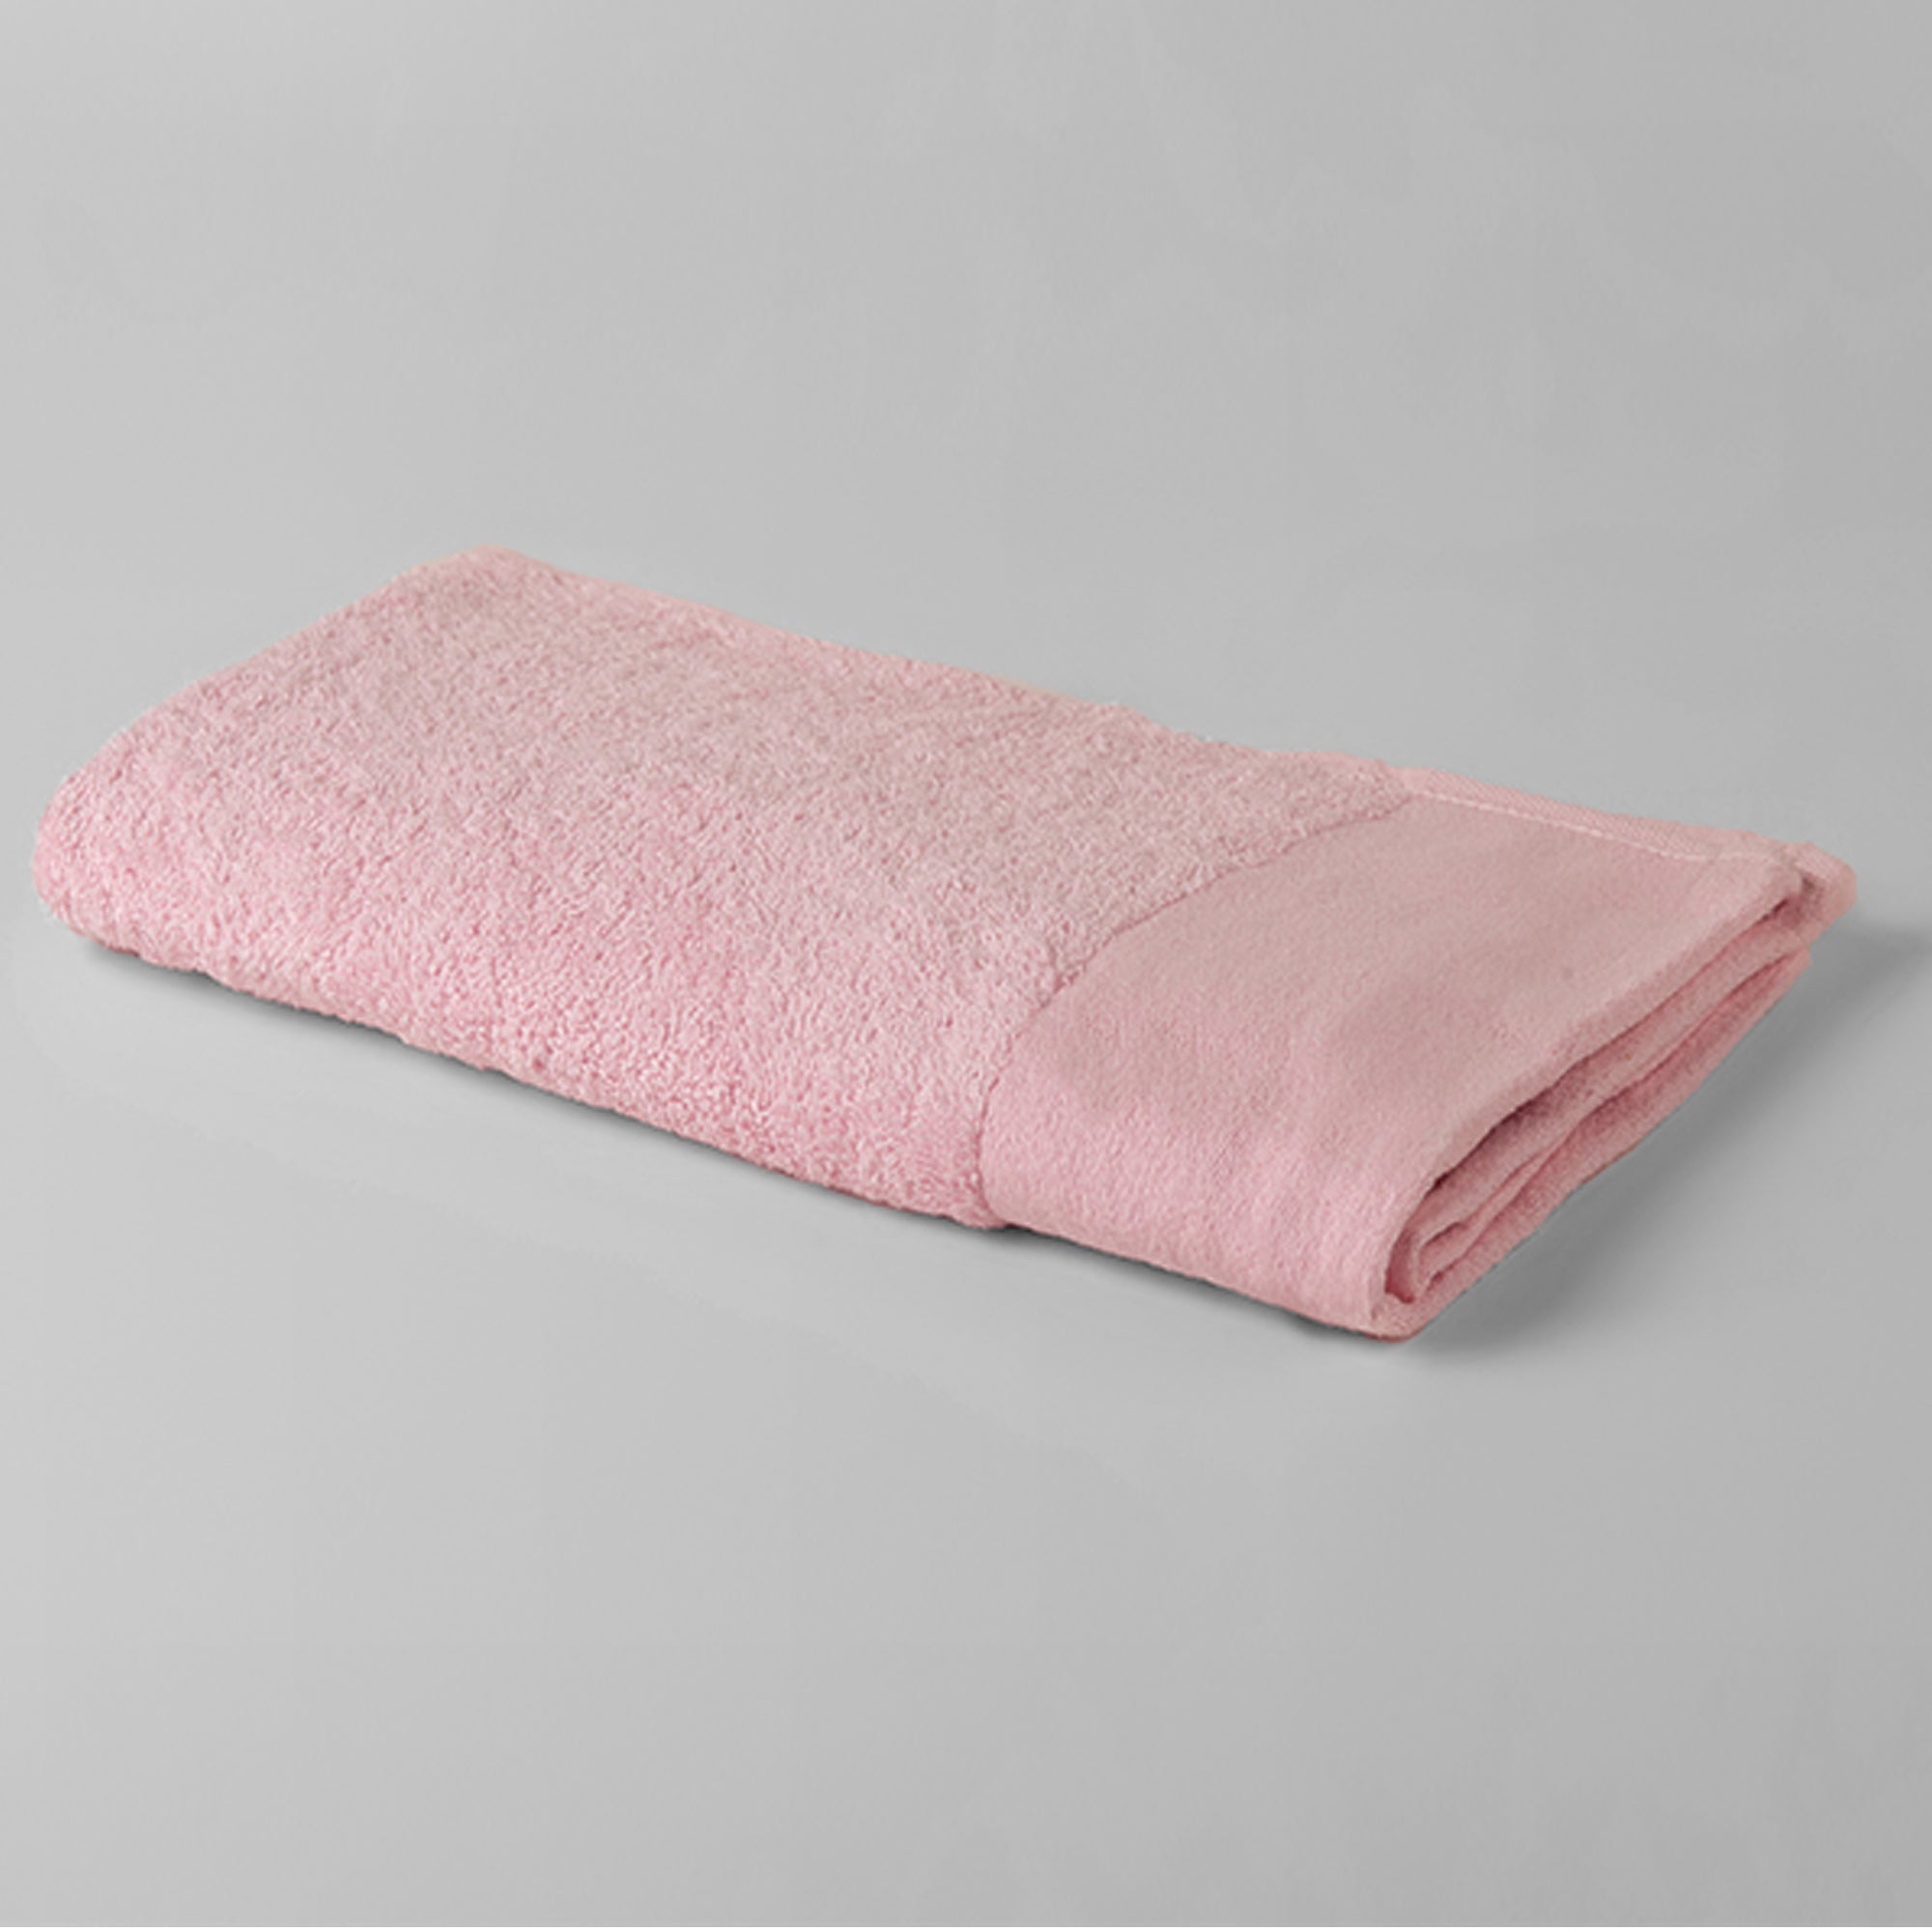 The Linen Company Towel Hand Pink Wide Border Hand Towel